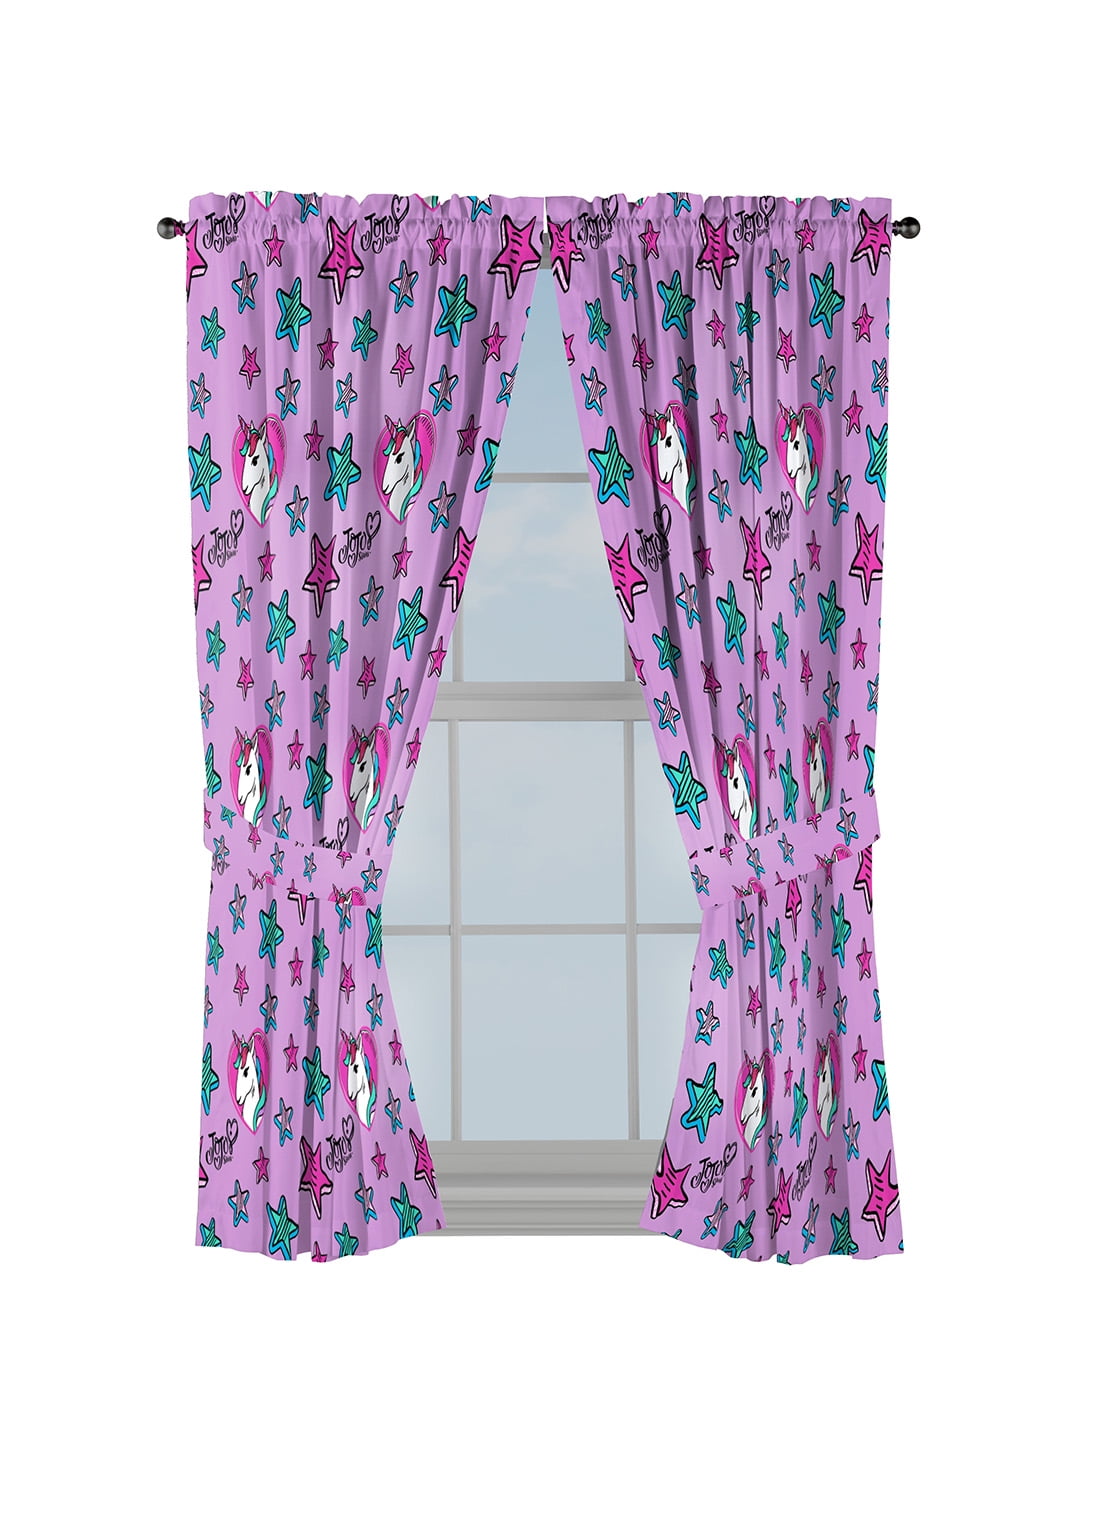 GIRLS BOYS WINDOW CURTAINS DRAPES WITH MULTIPLE DISNEY CHARACTERS/TV CHARACTERS 